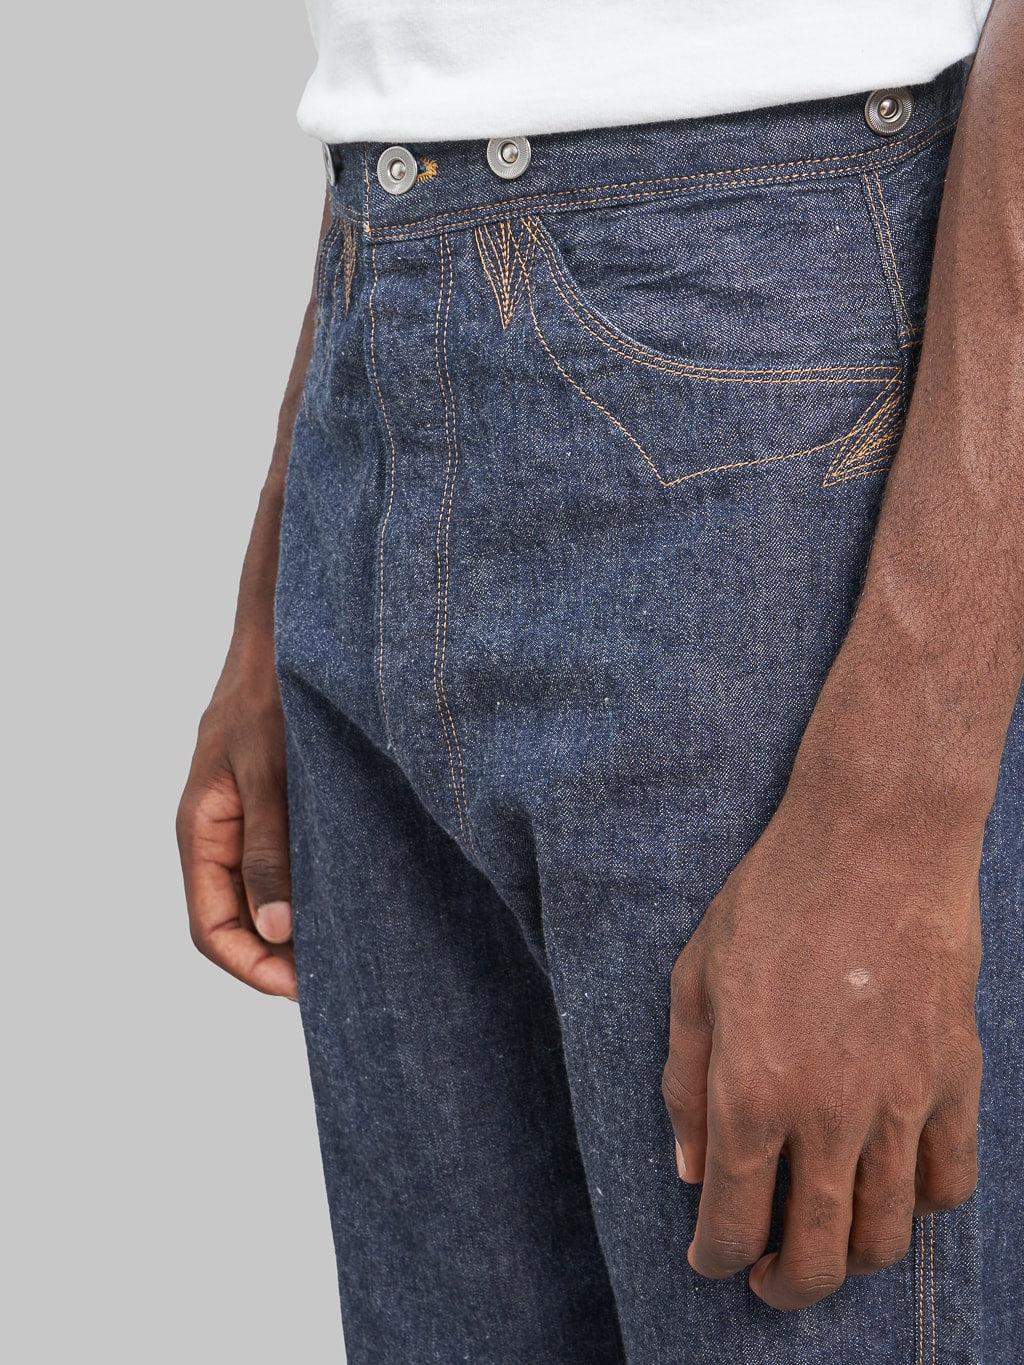 TCB Good Luck Wide Straight Jeans front details